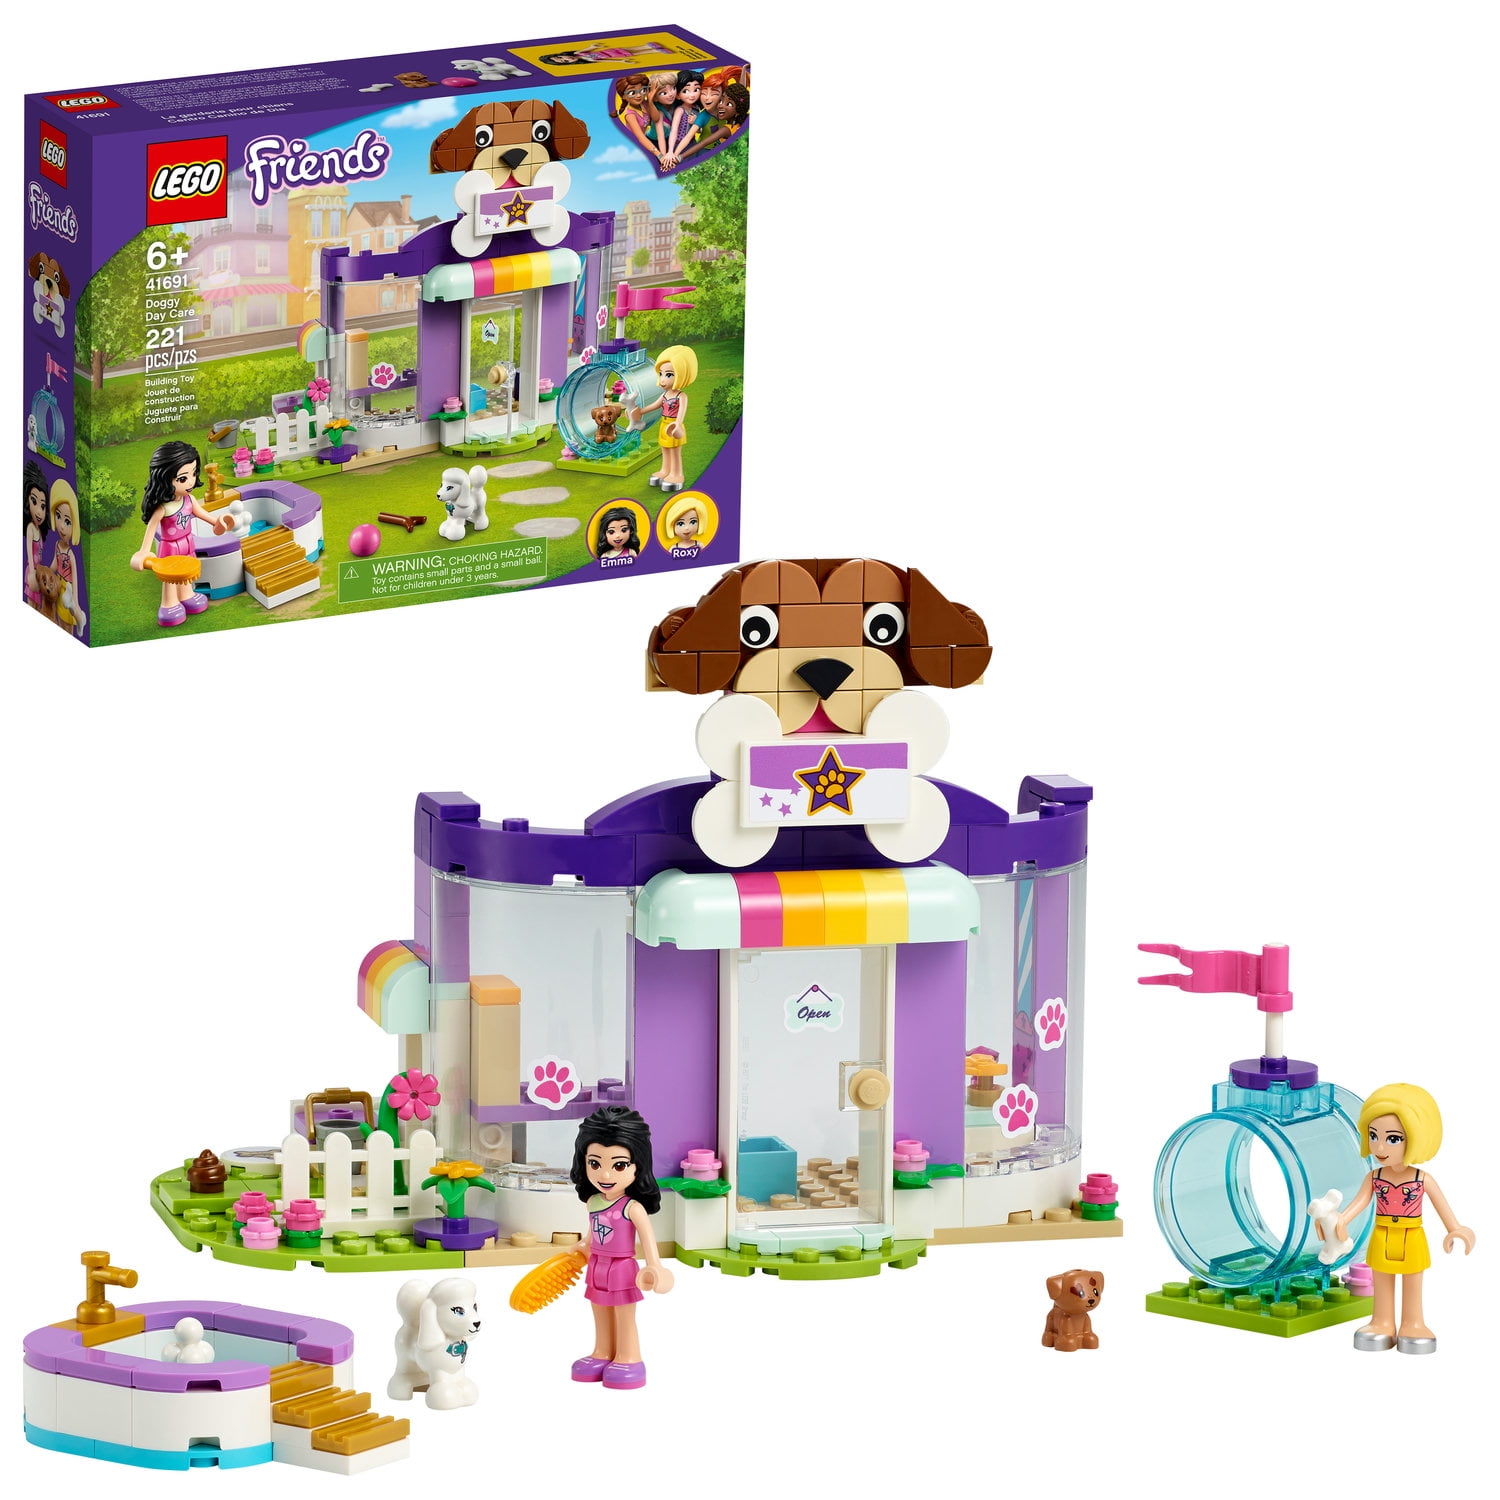 LEGO Friends Doggy Day Care 41691 Toy; Includes 2 Mini-Dolls and 2 Toy Dog Figures (221 Pieces) - Walmart.com